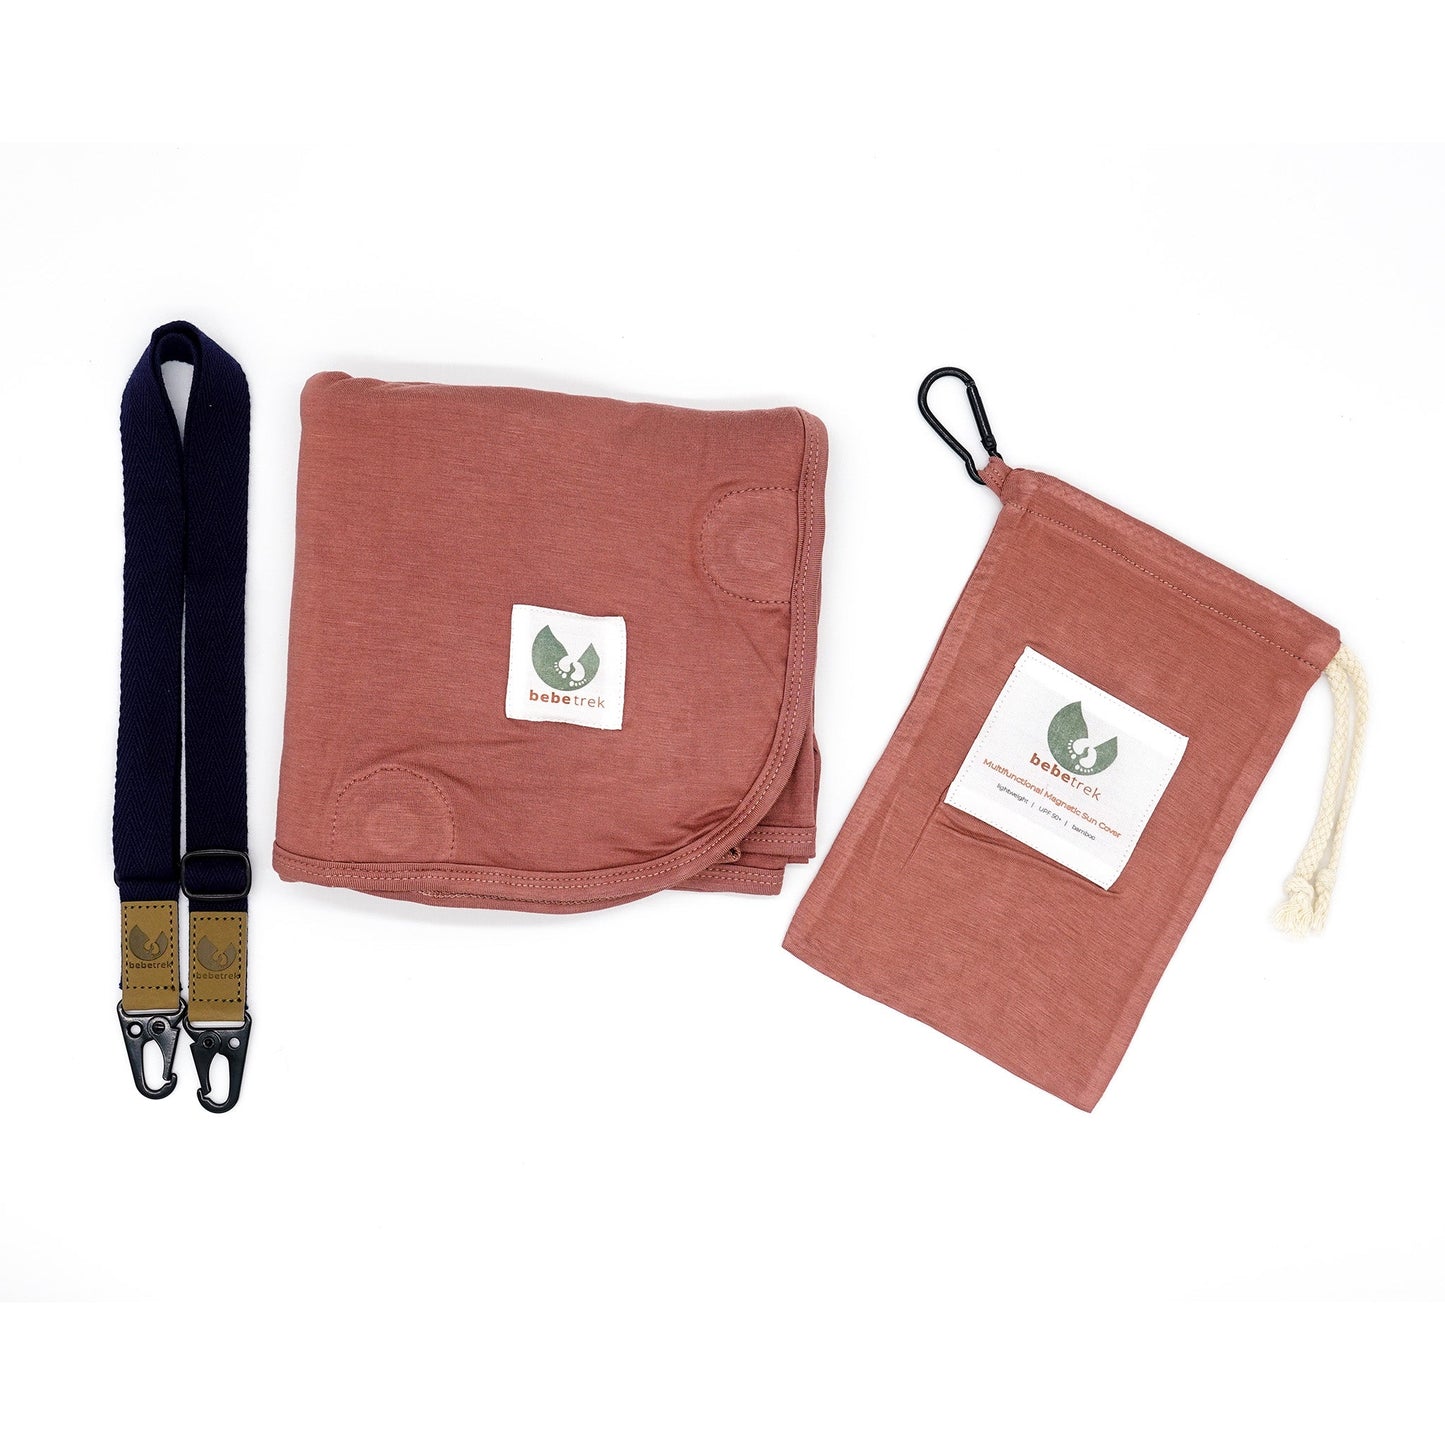 All Multifunctional magentic sun covers come with a UPF 50+ sun blanket, adjustable strap and carry bag with carabiner